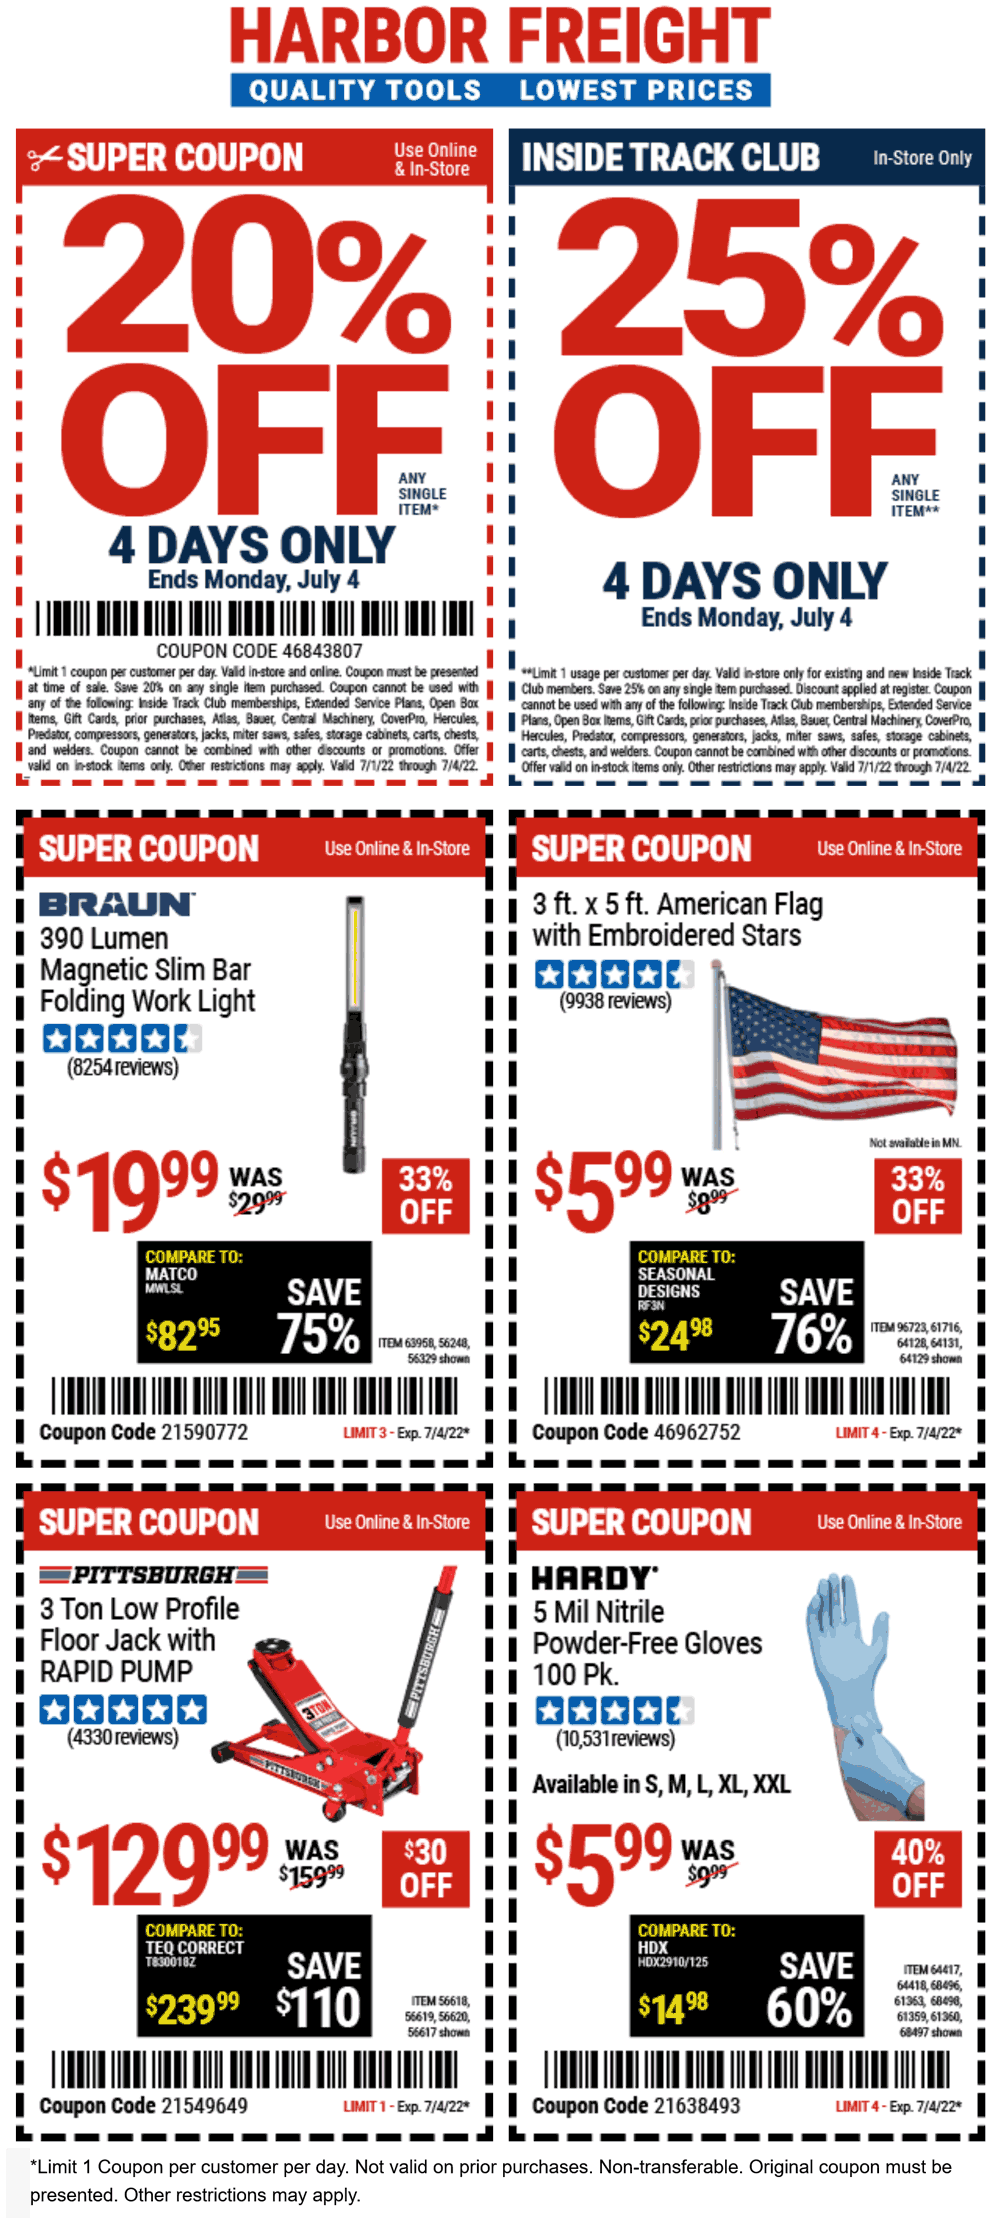 Harbor Freight coupons & promo code for [December 2022]